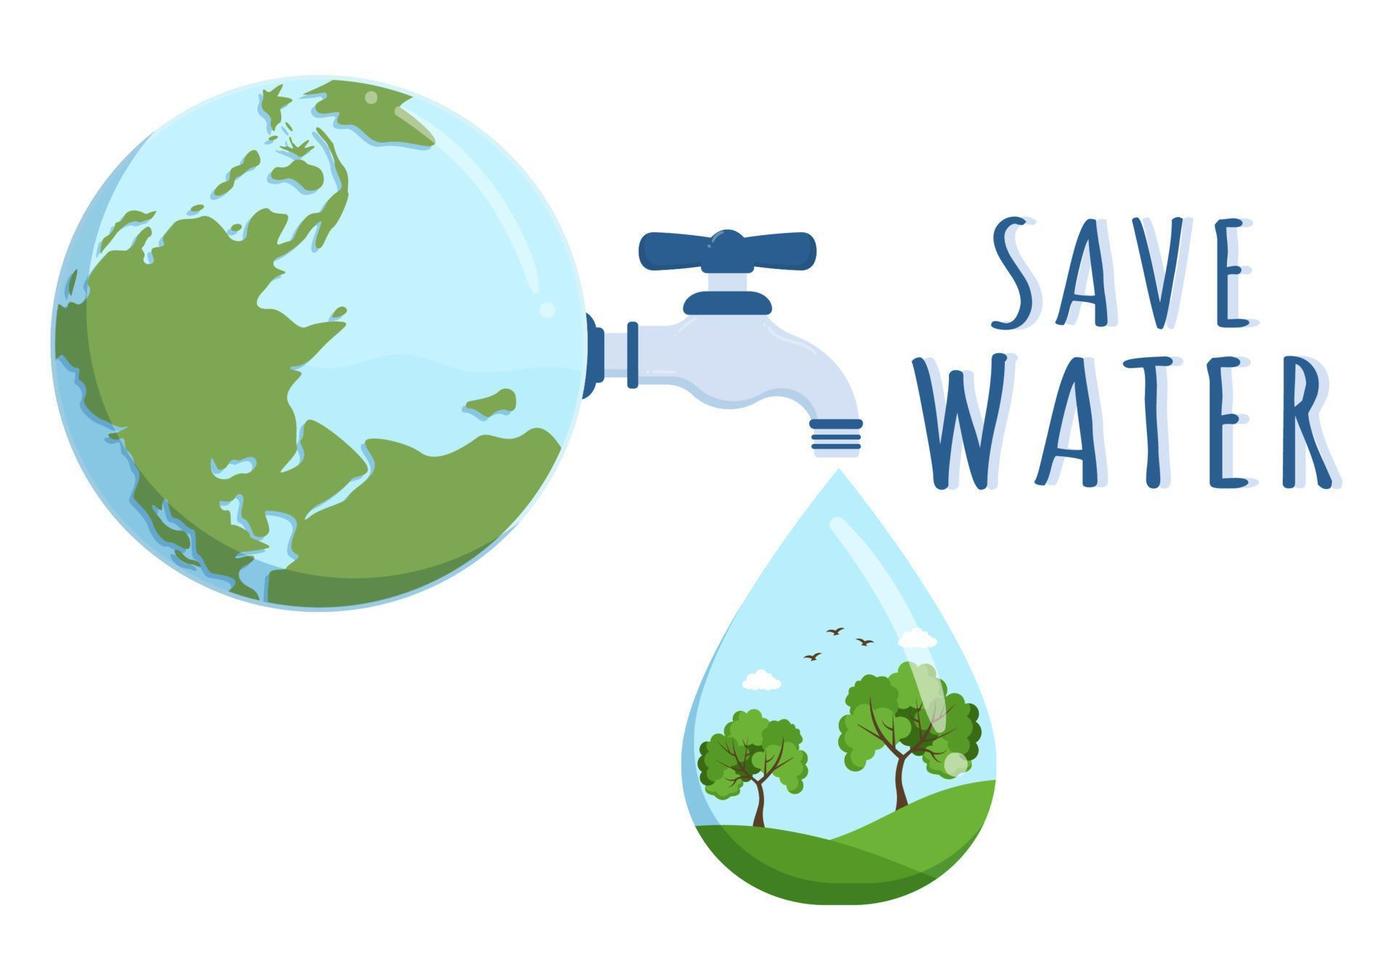 Water Saving Templates Hand Drawn Flat Cartoon Illustration for Mineral Savings Campaign with Faucet and Earth Concept vector